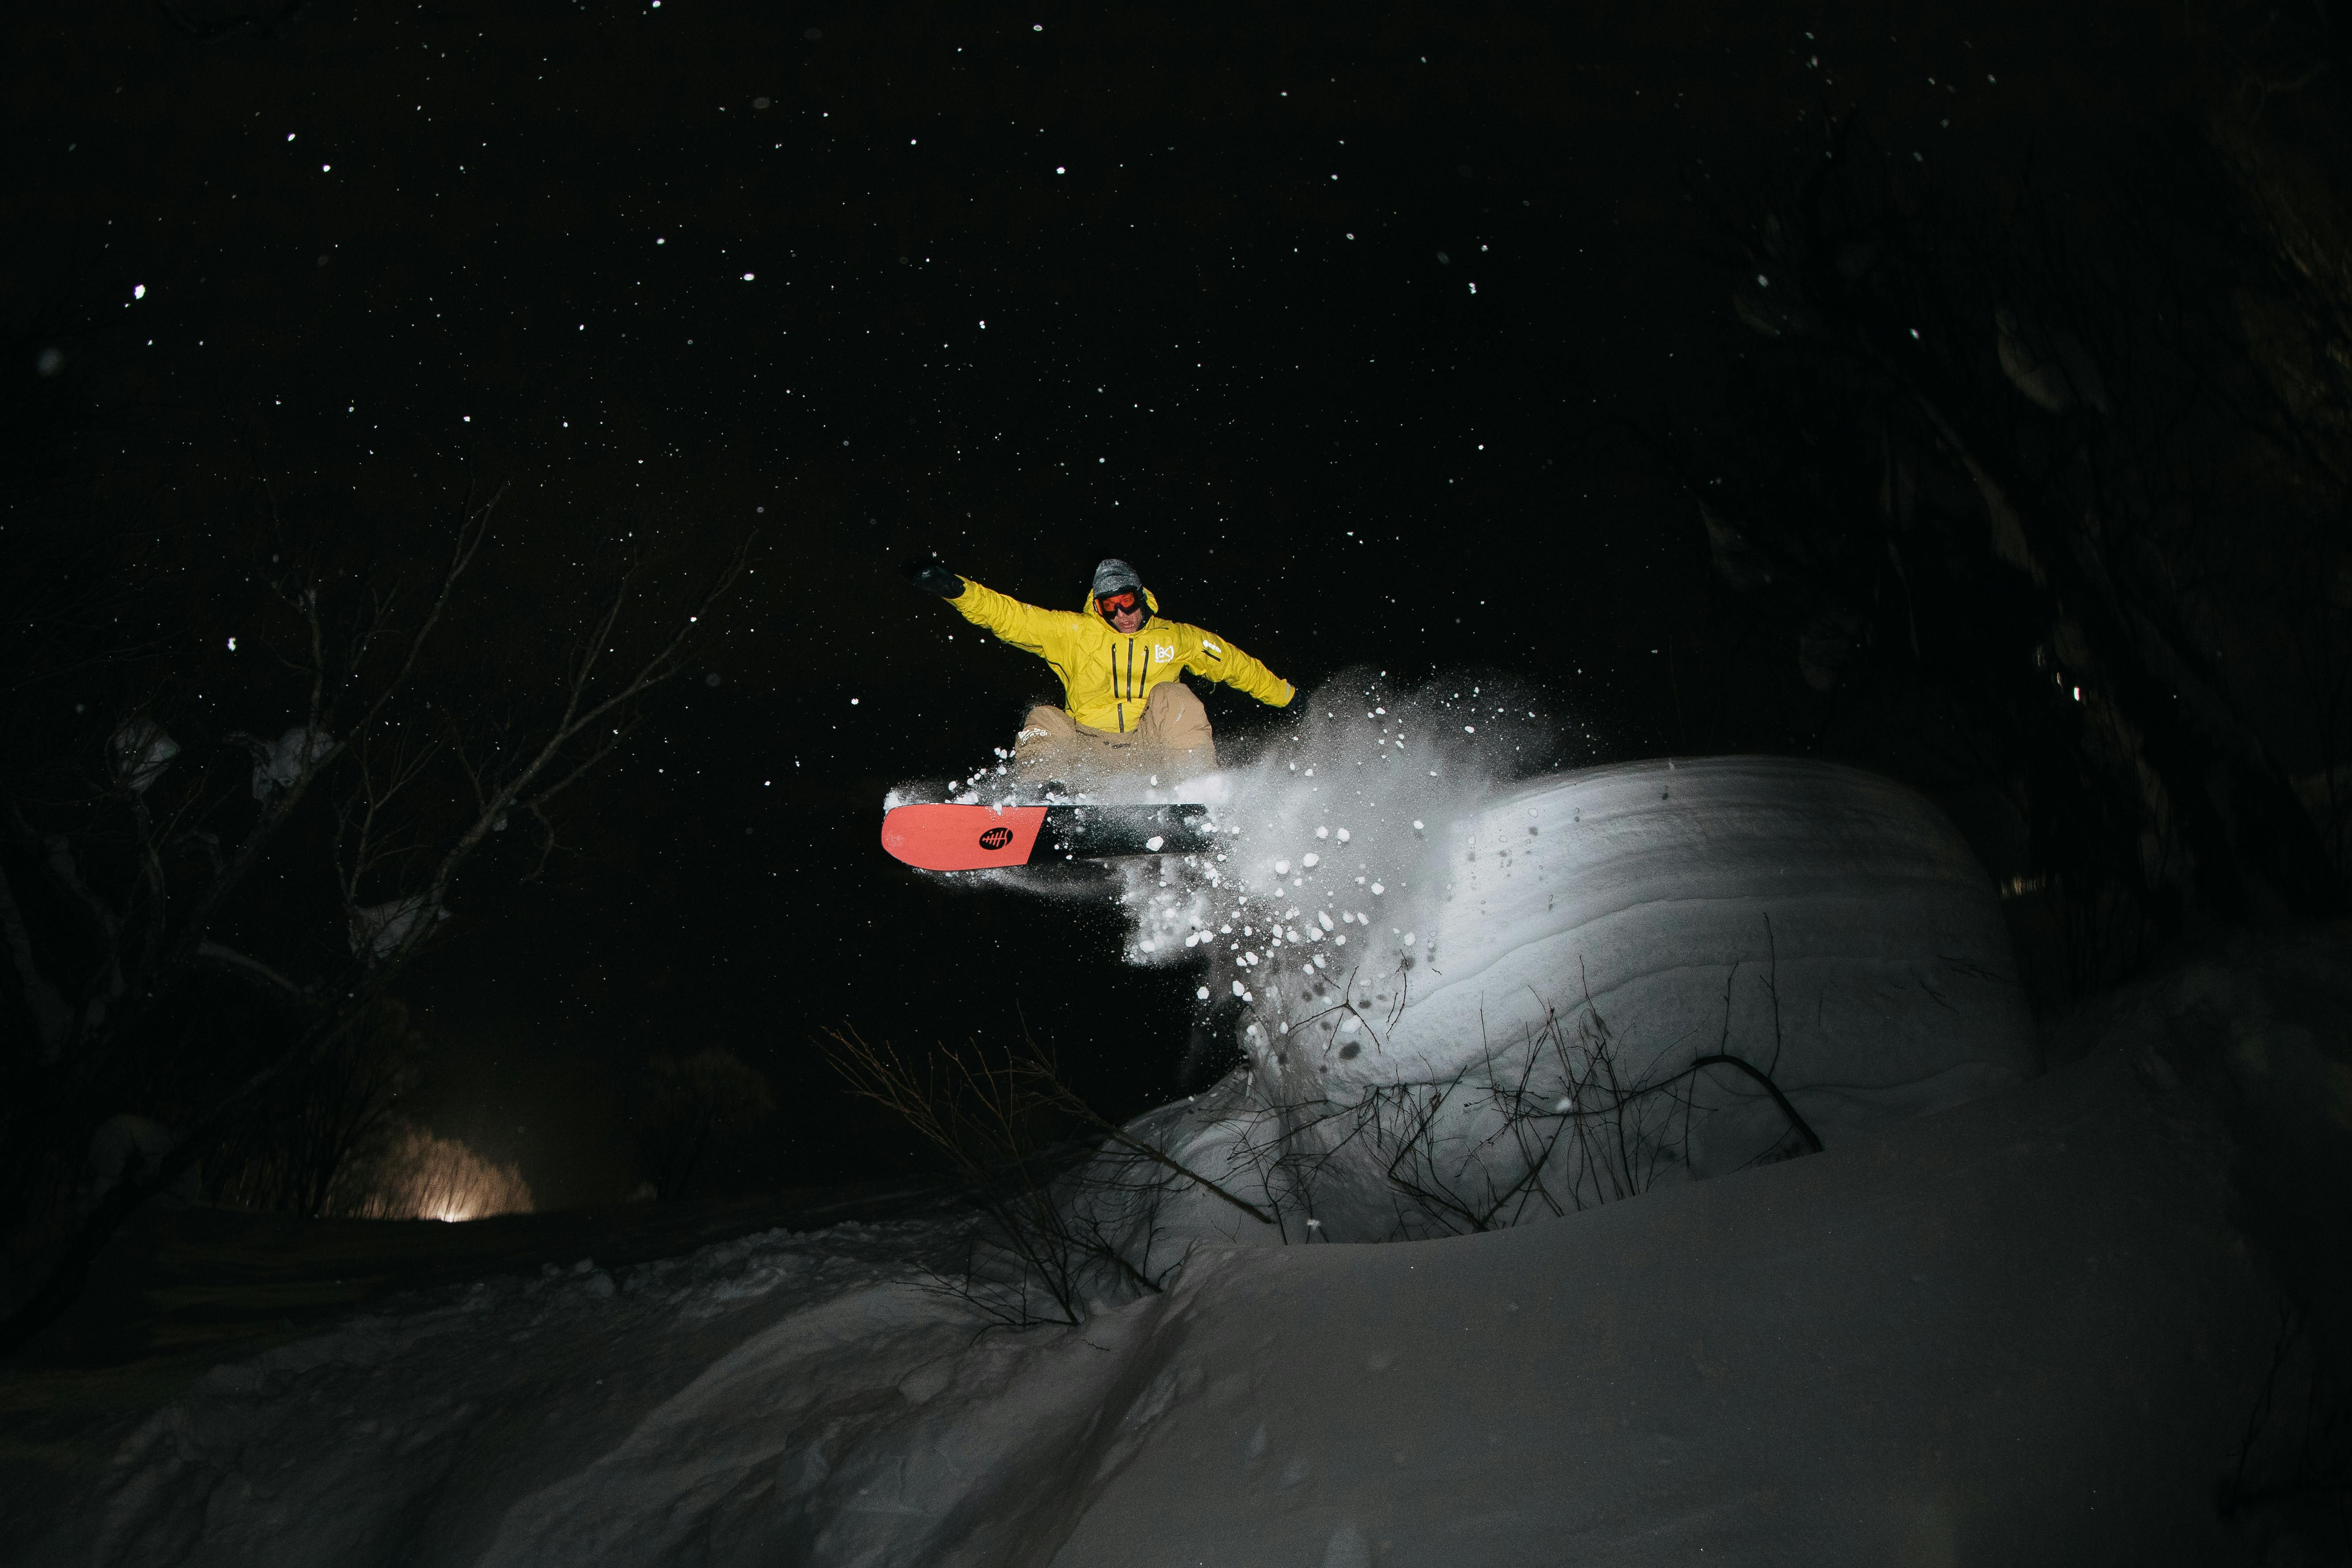 Dave catches air on his board at night, wearing a bright yellow jacket. The stars are visible in the night sky behind him.